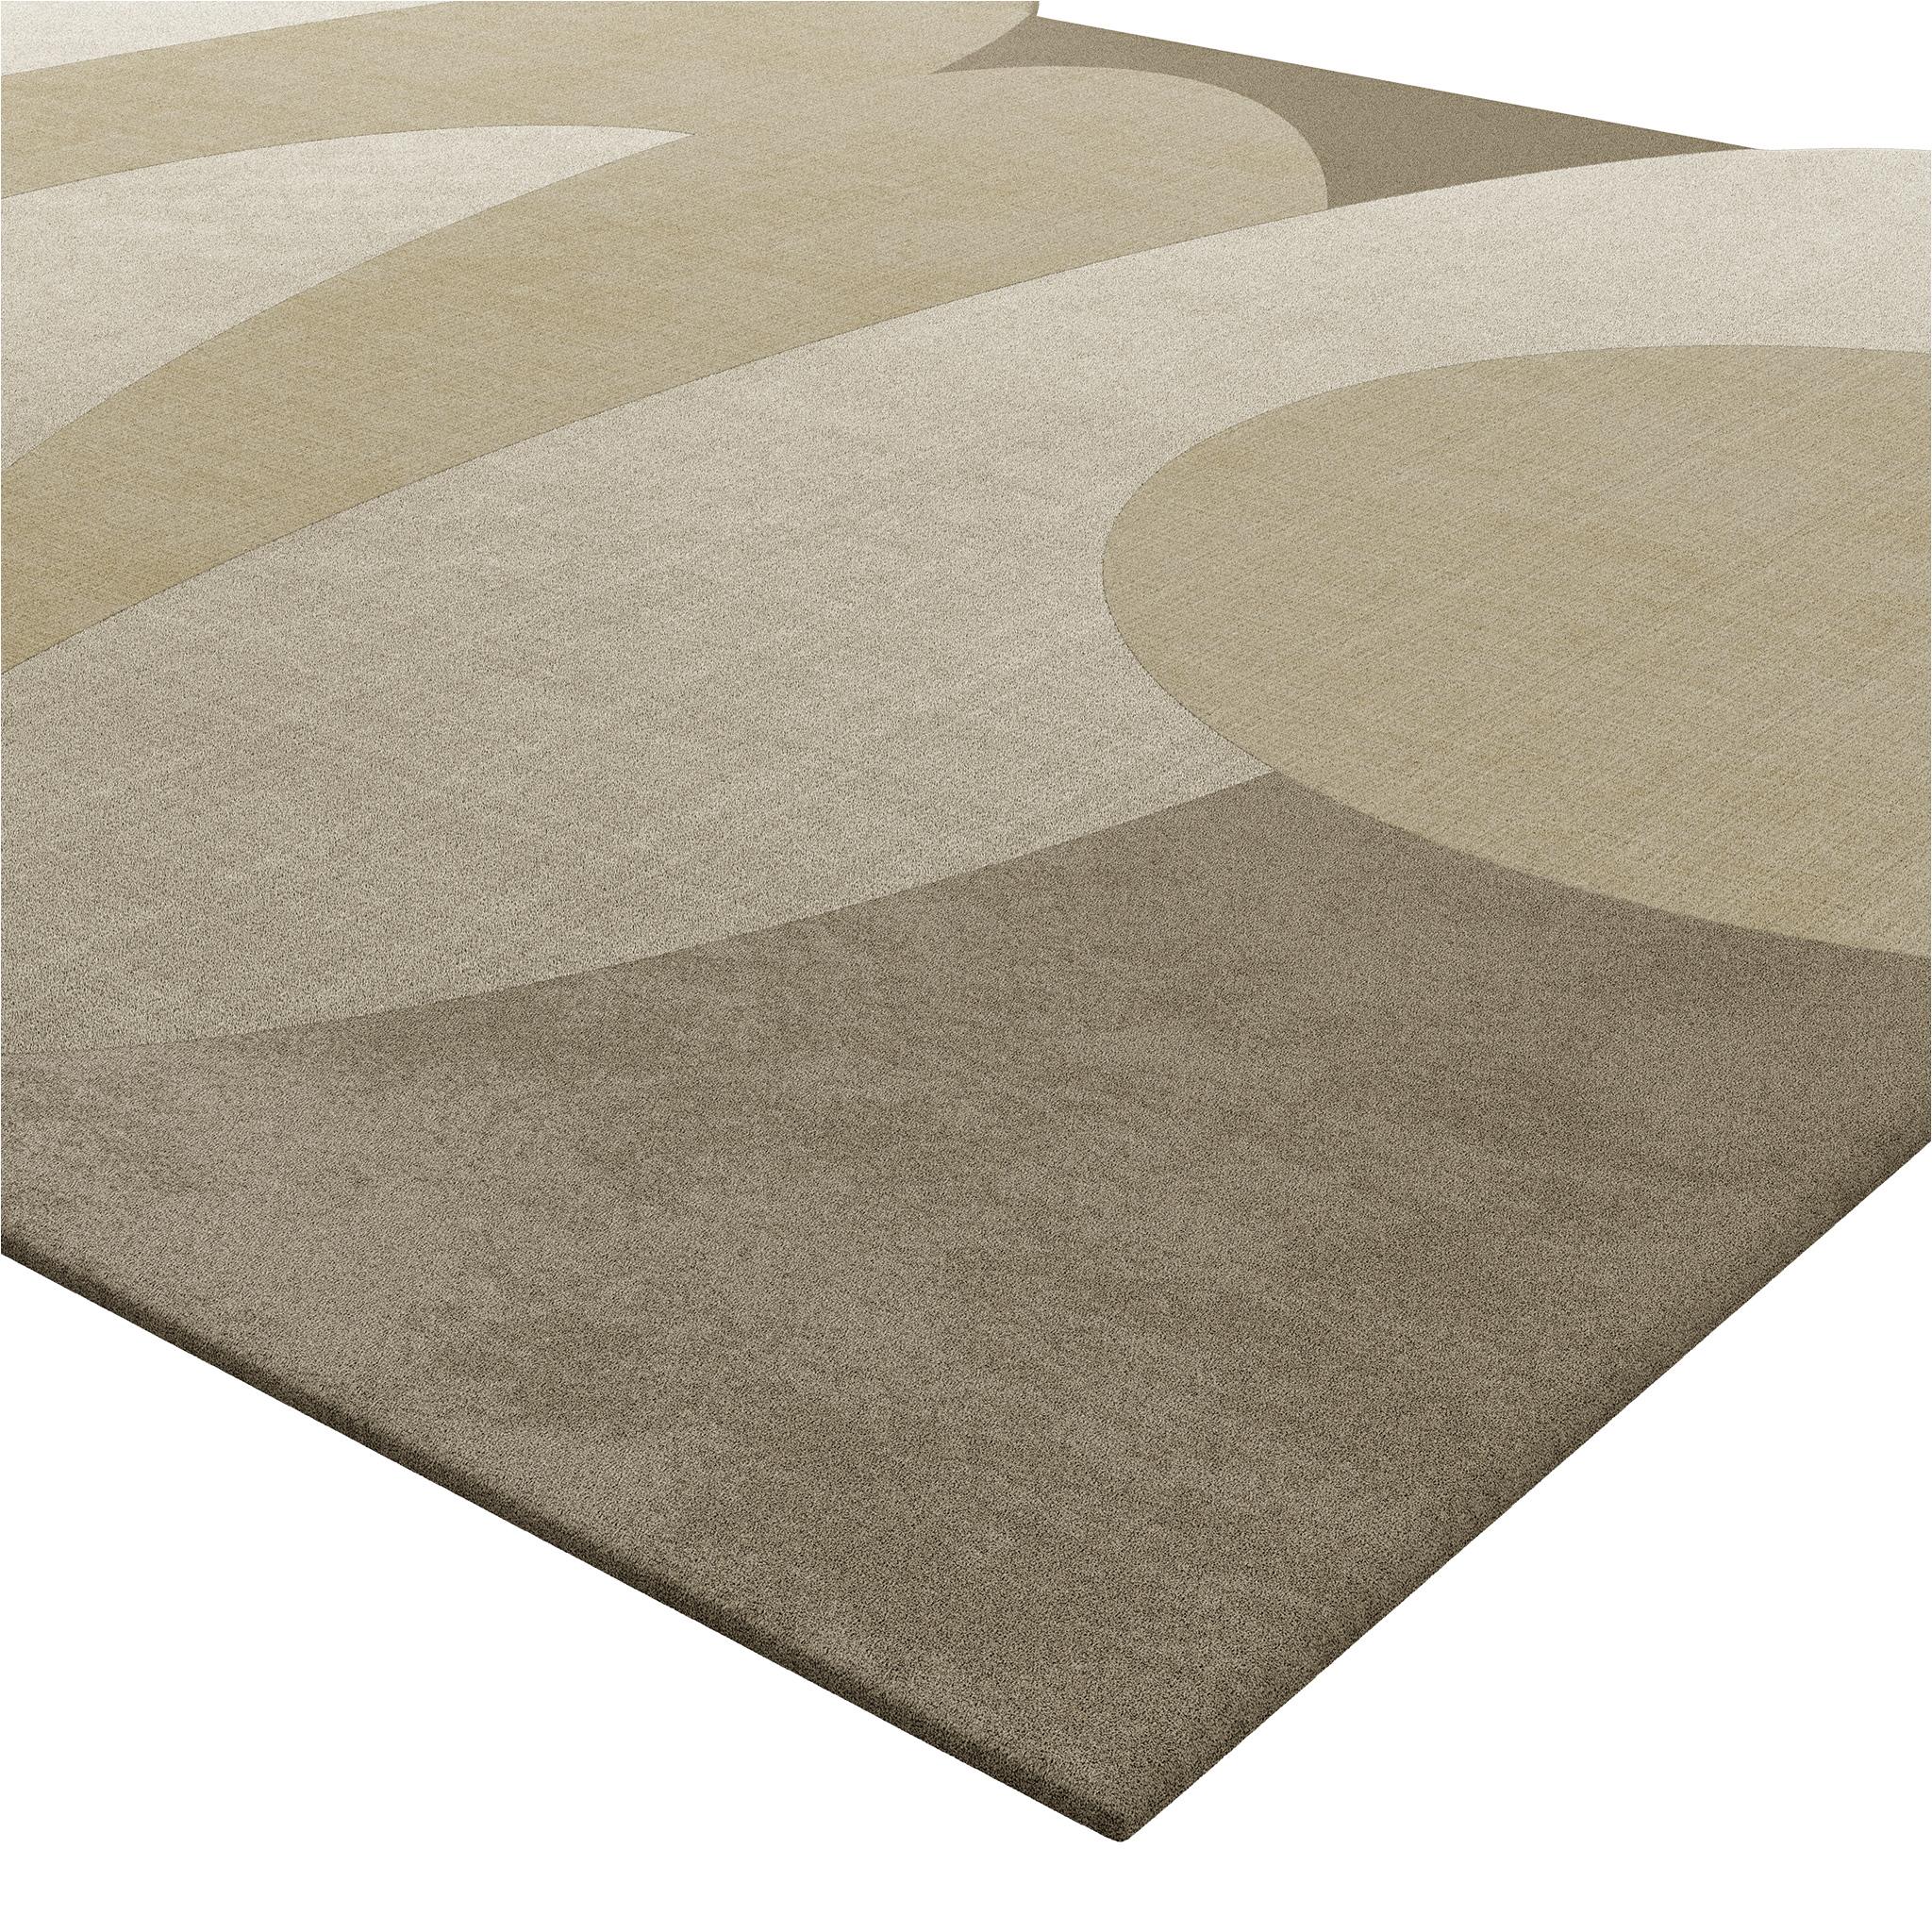 Minimalistic rug, in a neutral color, contemporary, suitable for any modern interior.
Made in Lyocell, it can also be produced in wool or viscose, fully customizable in its color and dimensions.

With a minimalist design, it offers a clean and